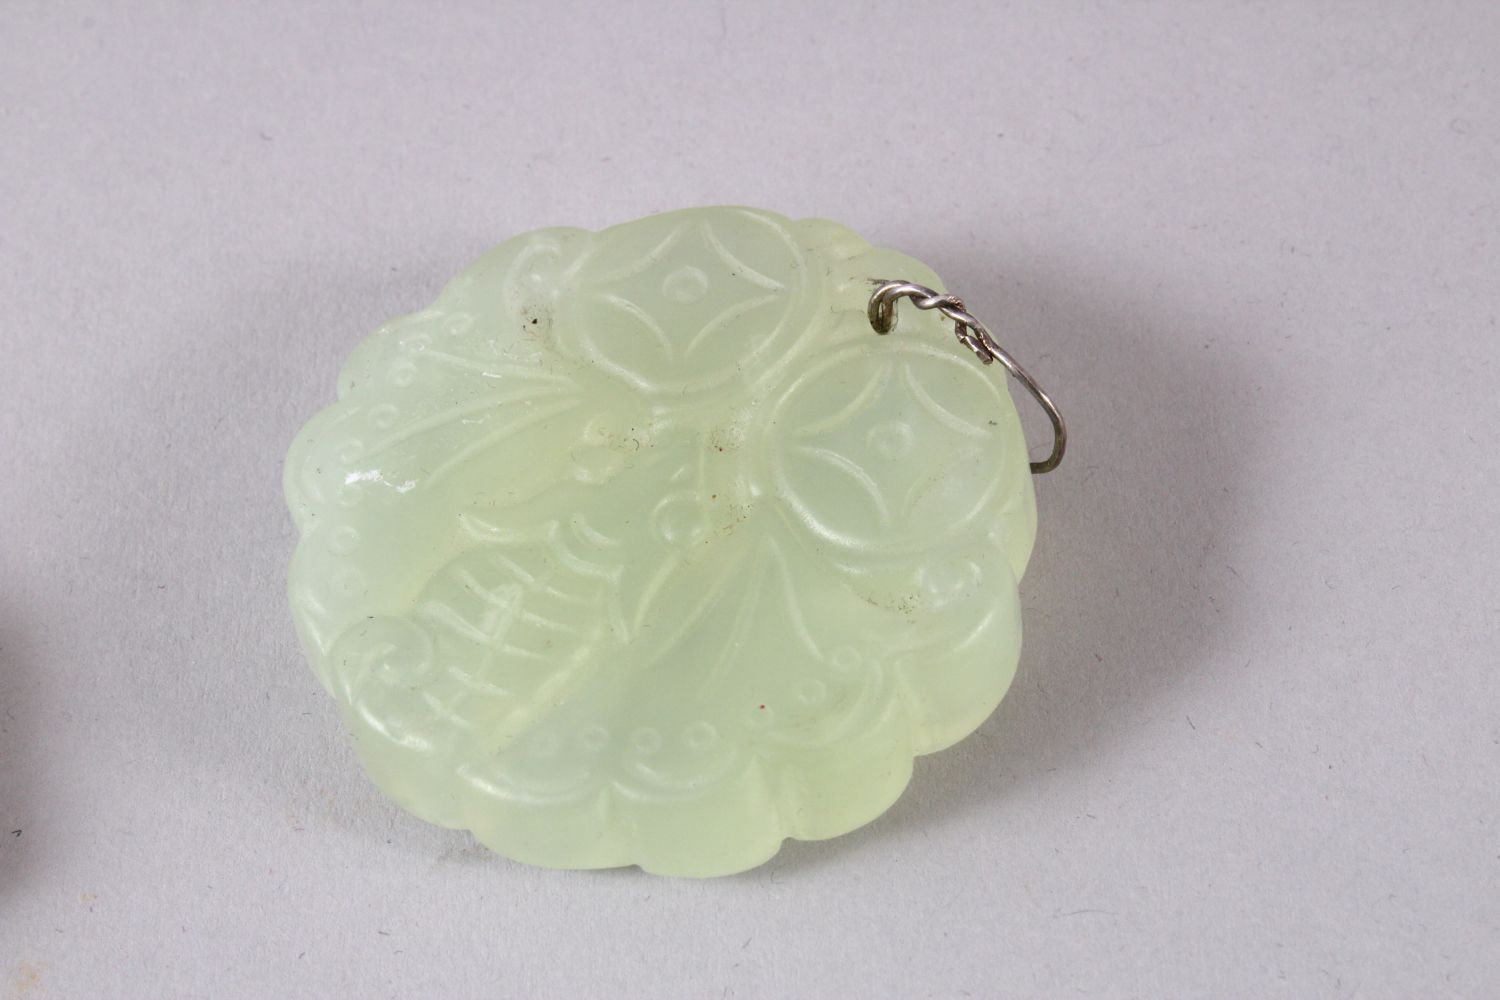 TWO CHINESE CARVED JADE BUTTERFLY & DRAGON BI DISK PENDANTS, one pale almost translucent jade carved - Image 2 of 4